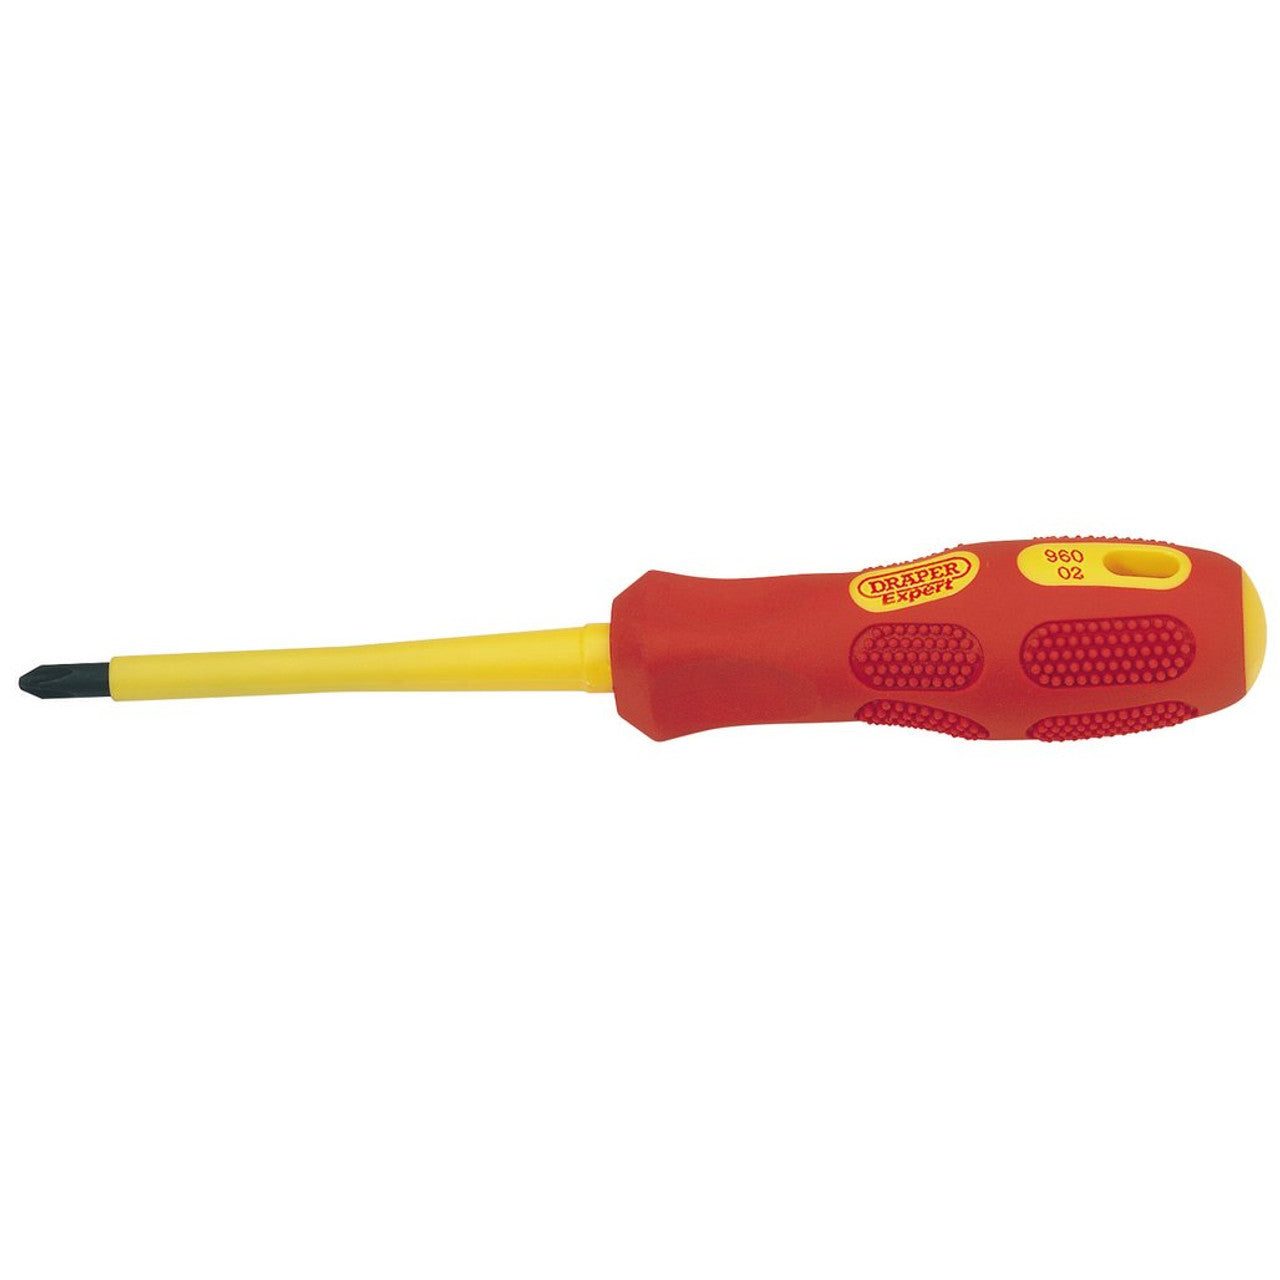 Draper 69226 VDE Approved Fully Insulated Cross Slot Screwdriver, No.2 x 100mm